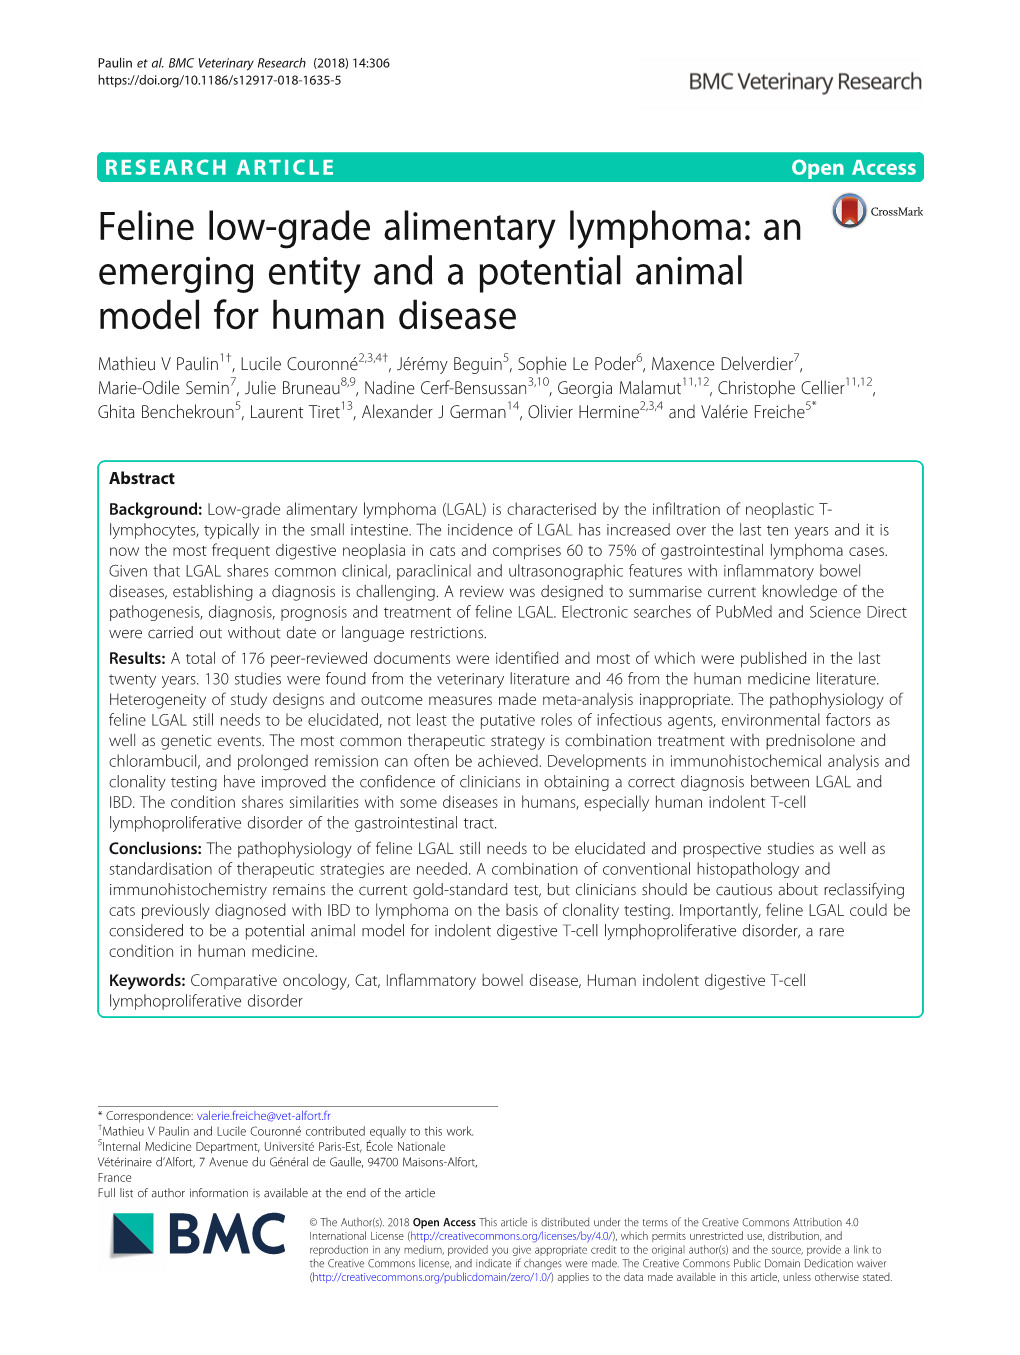 Feline Low-Grade Alimentary Lymphoma: an Emerging Entity And